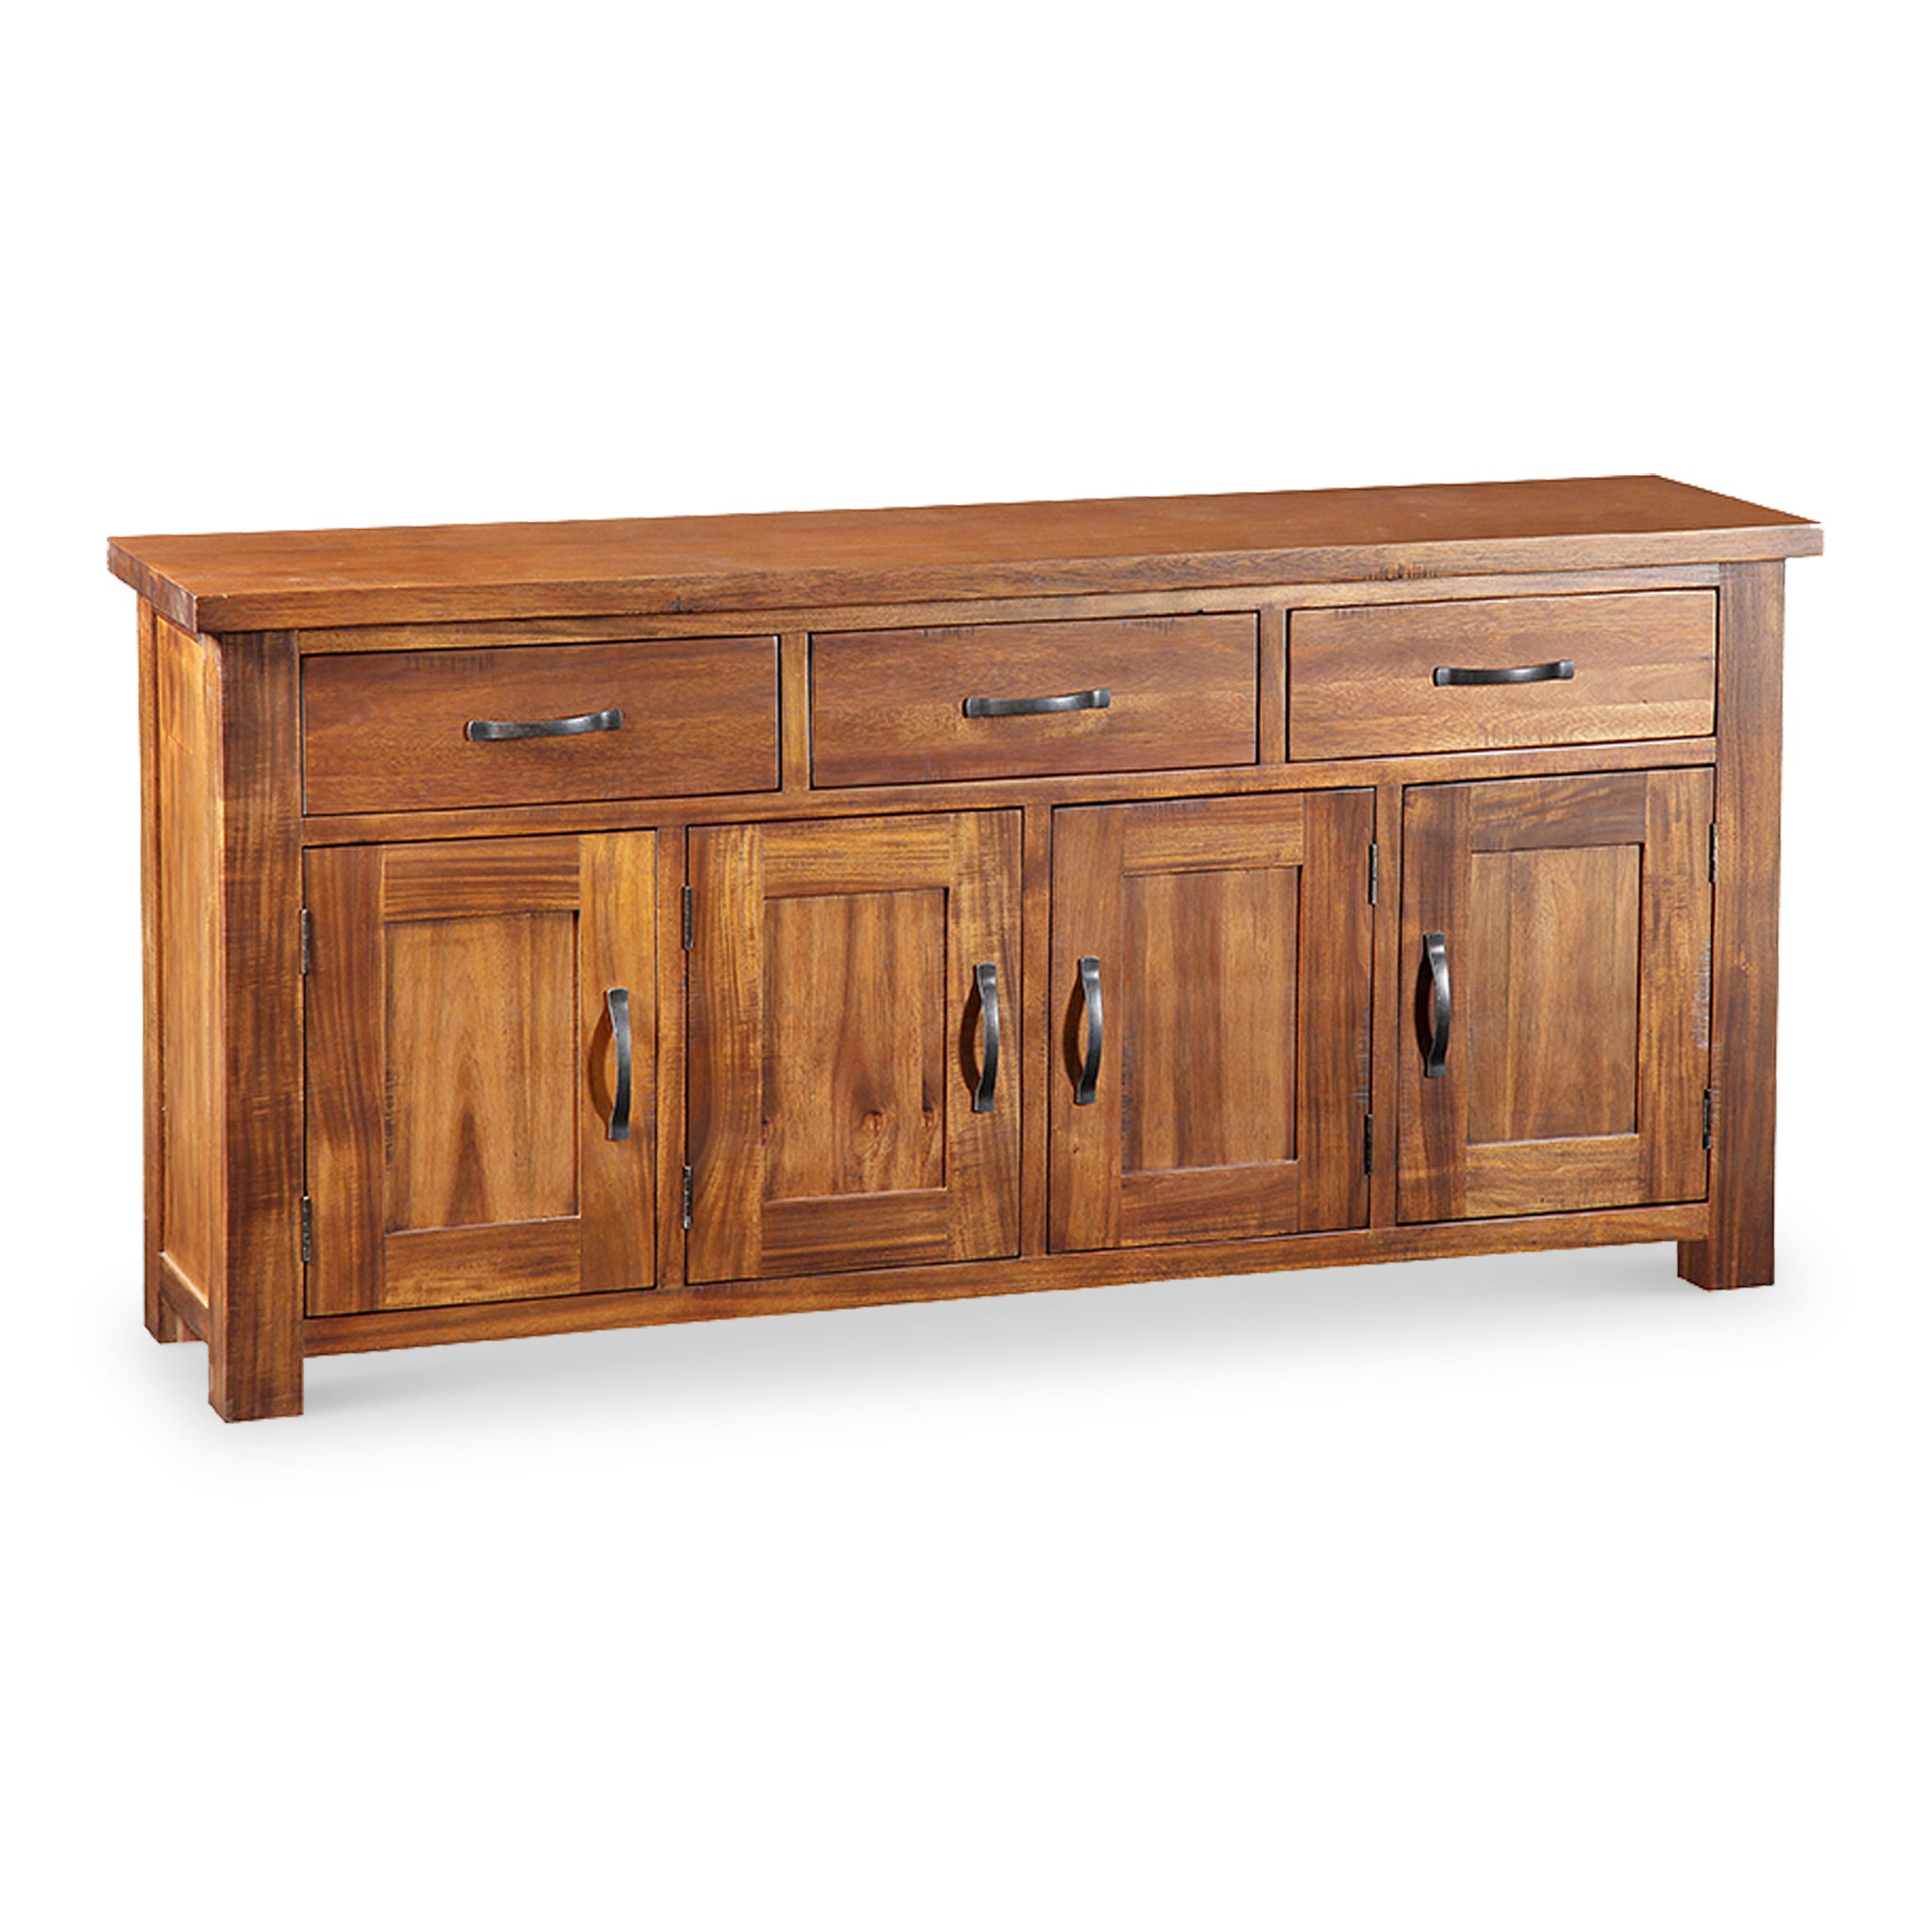 Ladock Acacia Large Sideboard Cabinet For Living Room Roseland